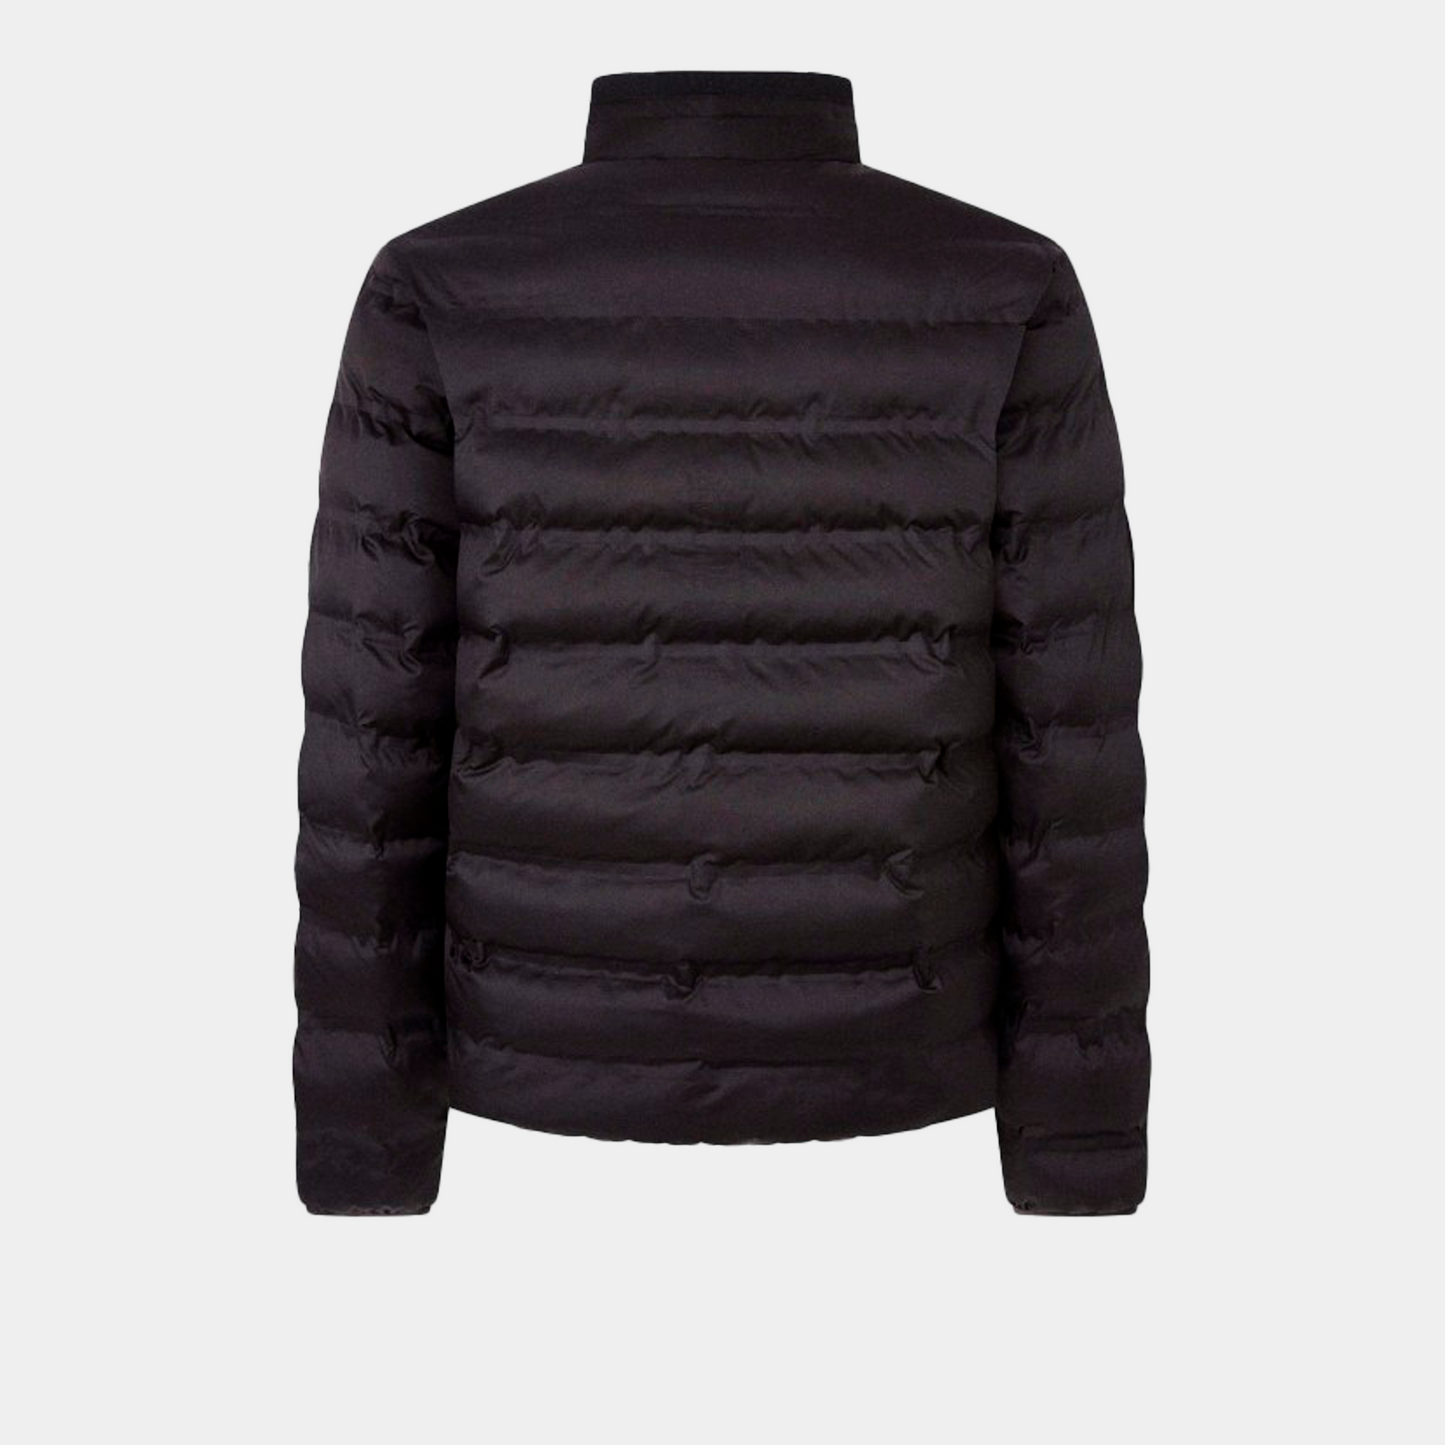 CHAQUETA HACKETT NEGRO 100% RECYCLED POLYESTER (HM403016-999)